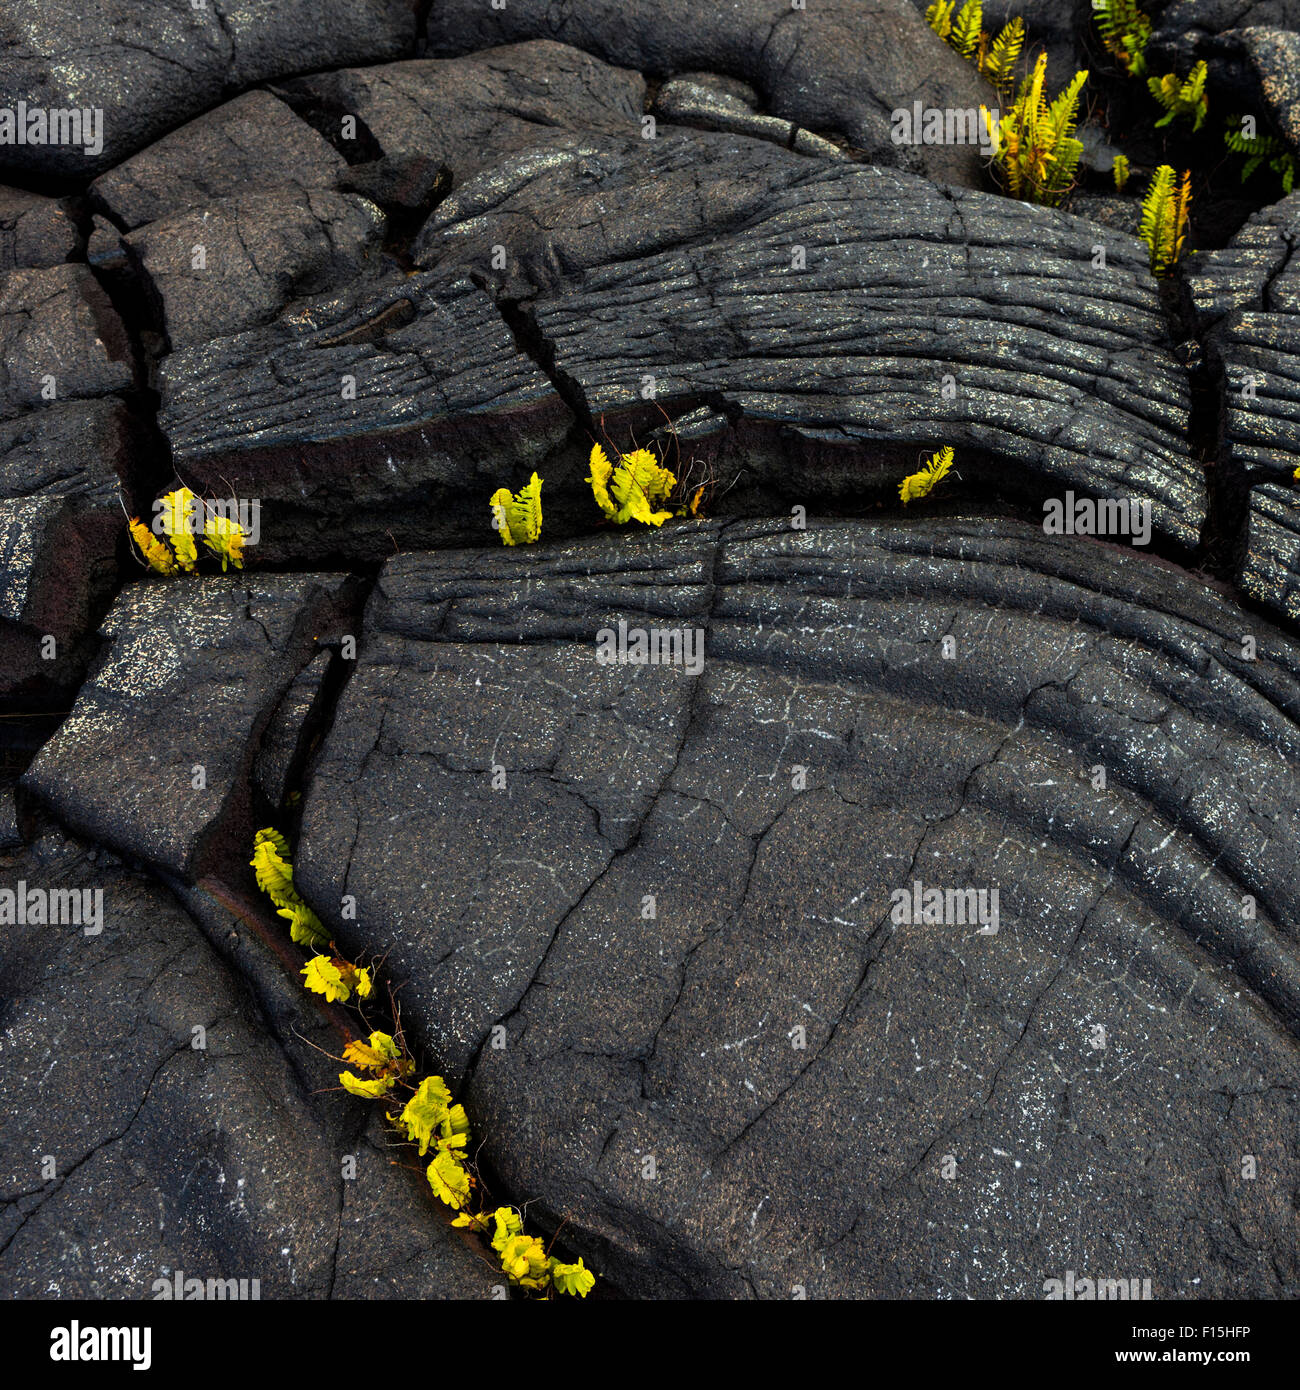 Weathered pahoehoe rope lava with ferns at Alanui Kahiko in Hawaii Volcanoes National Park Stock Photo